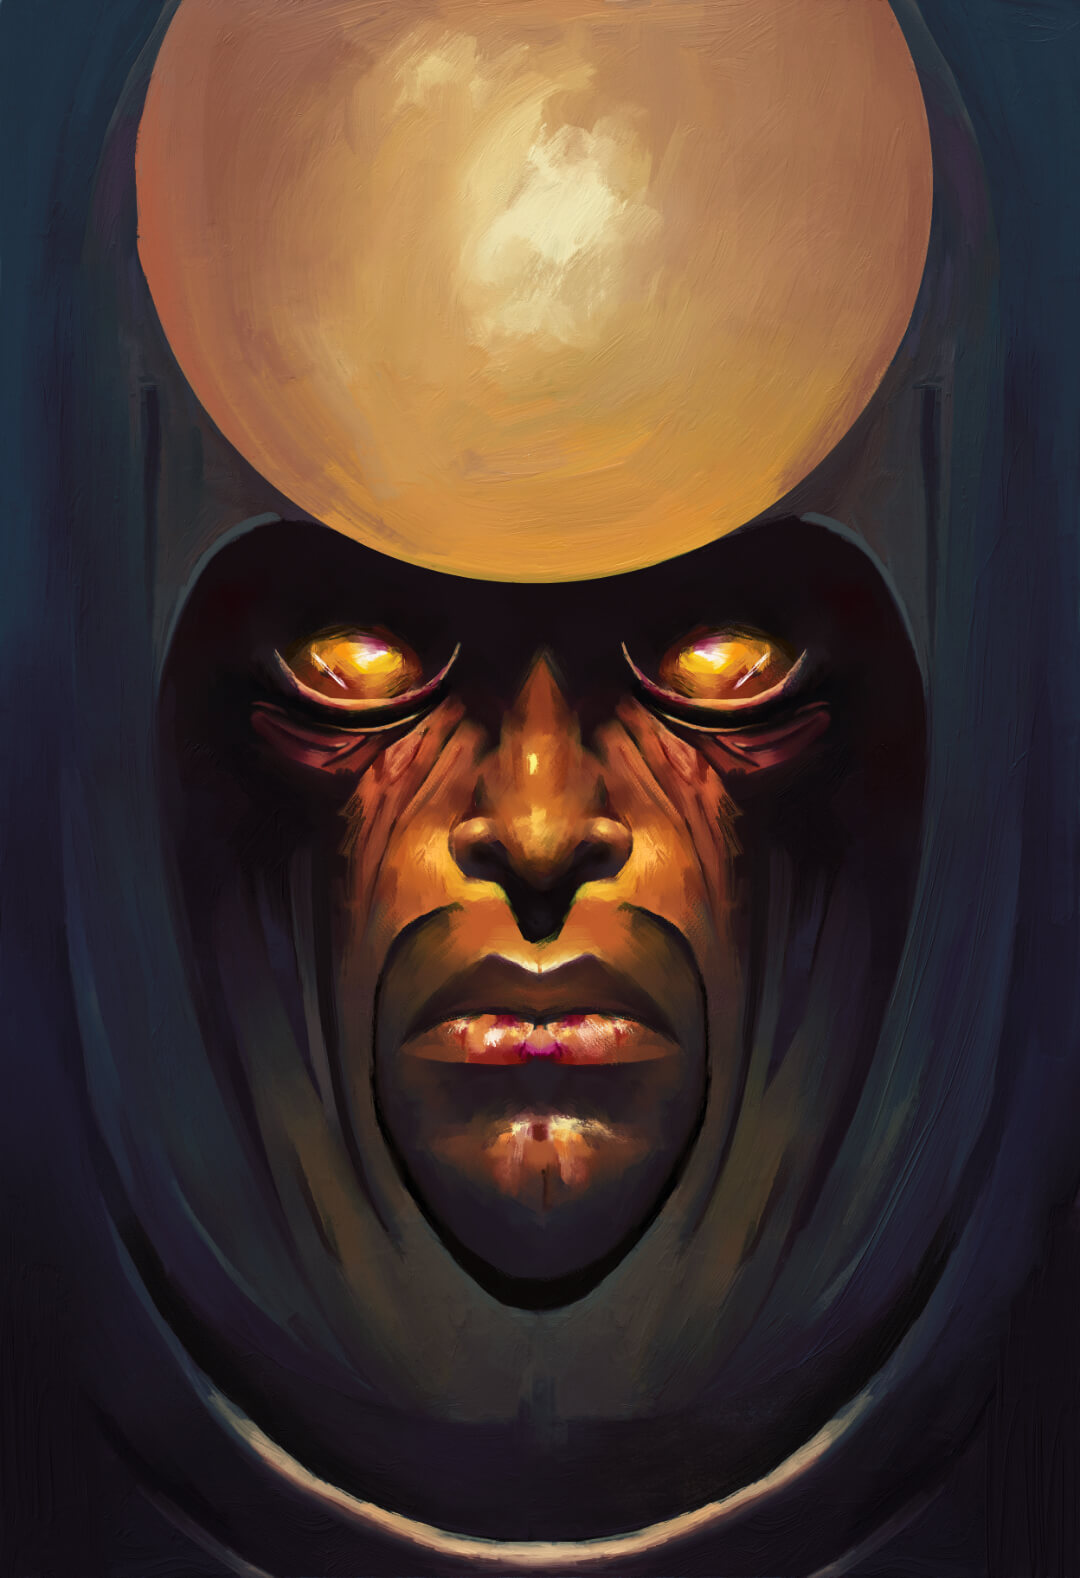 Portrait of a hooded middle-eastern deity with amber eyes and a golden ball floating above his head.